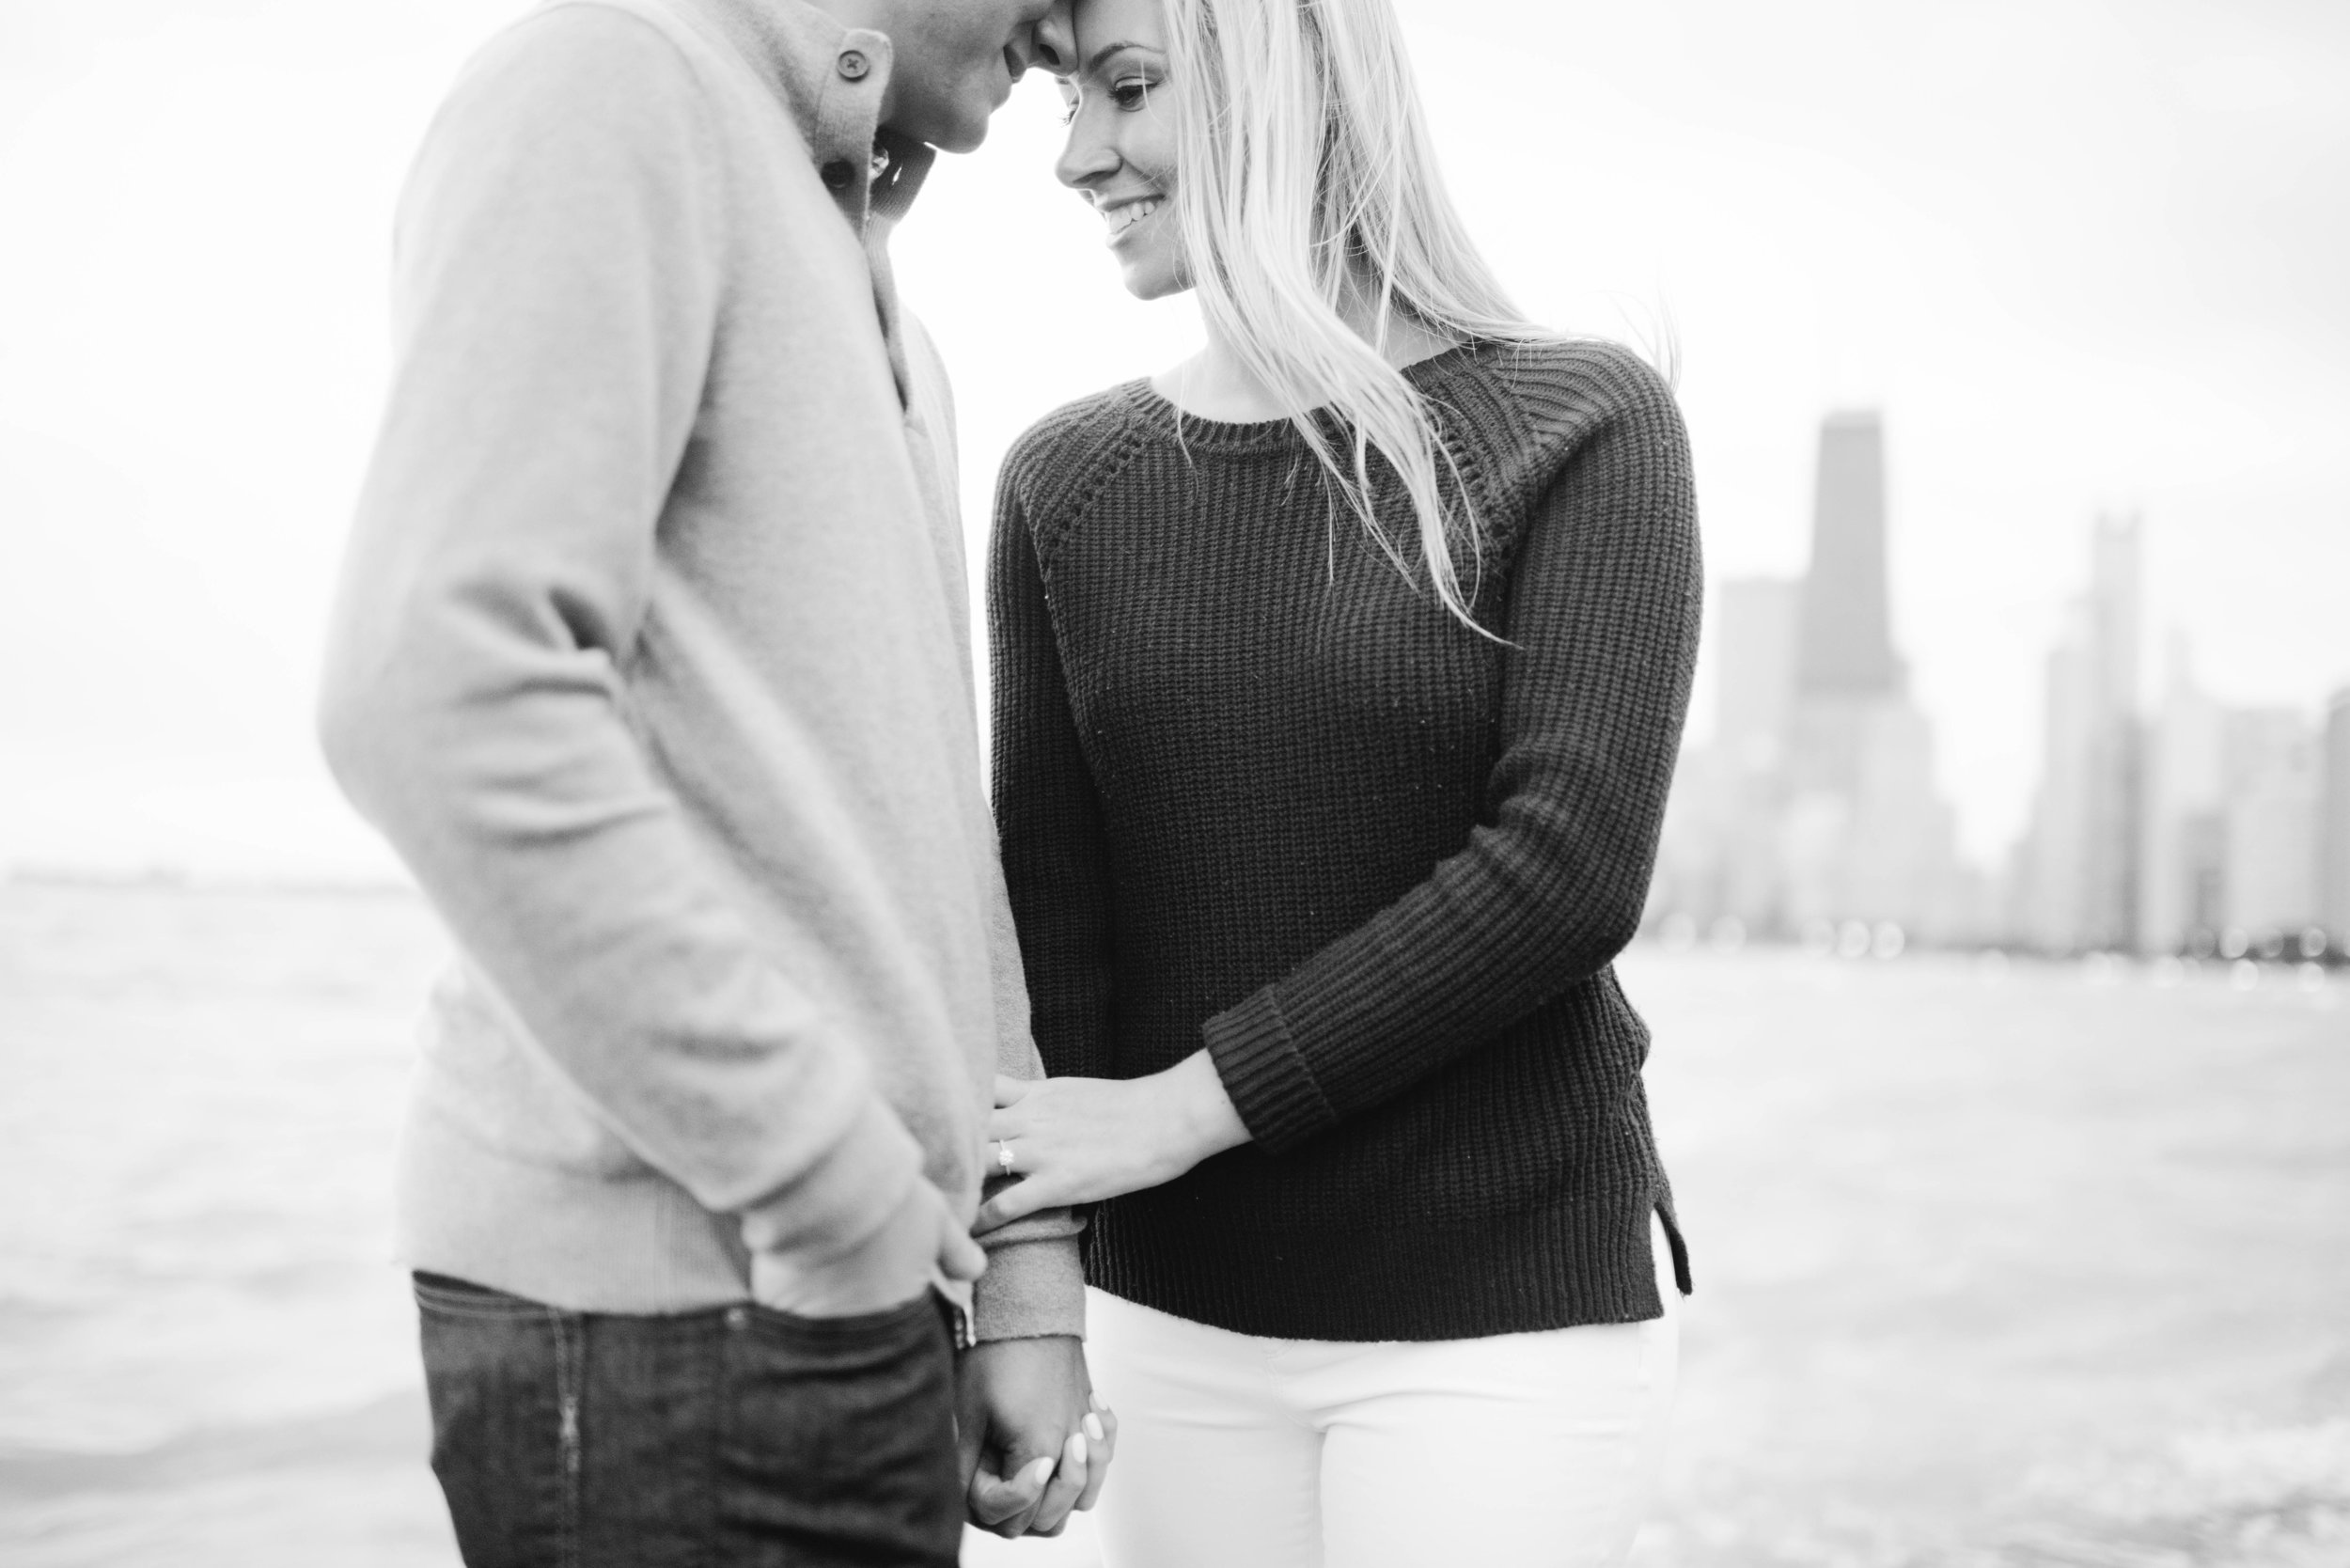 Chicago River Engagement Session North Avenue Beach Engagement Session Erika Aileen Photography Chicago Wedding Photographer